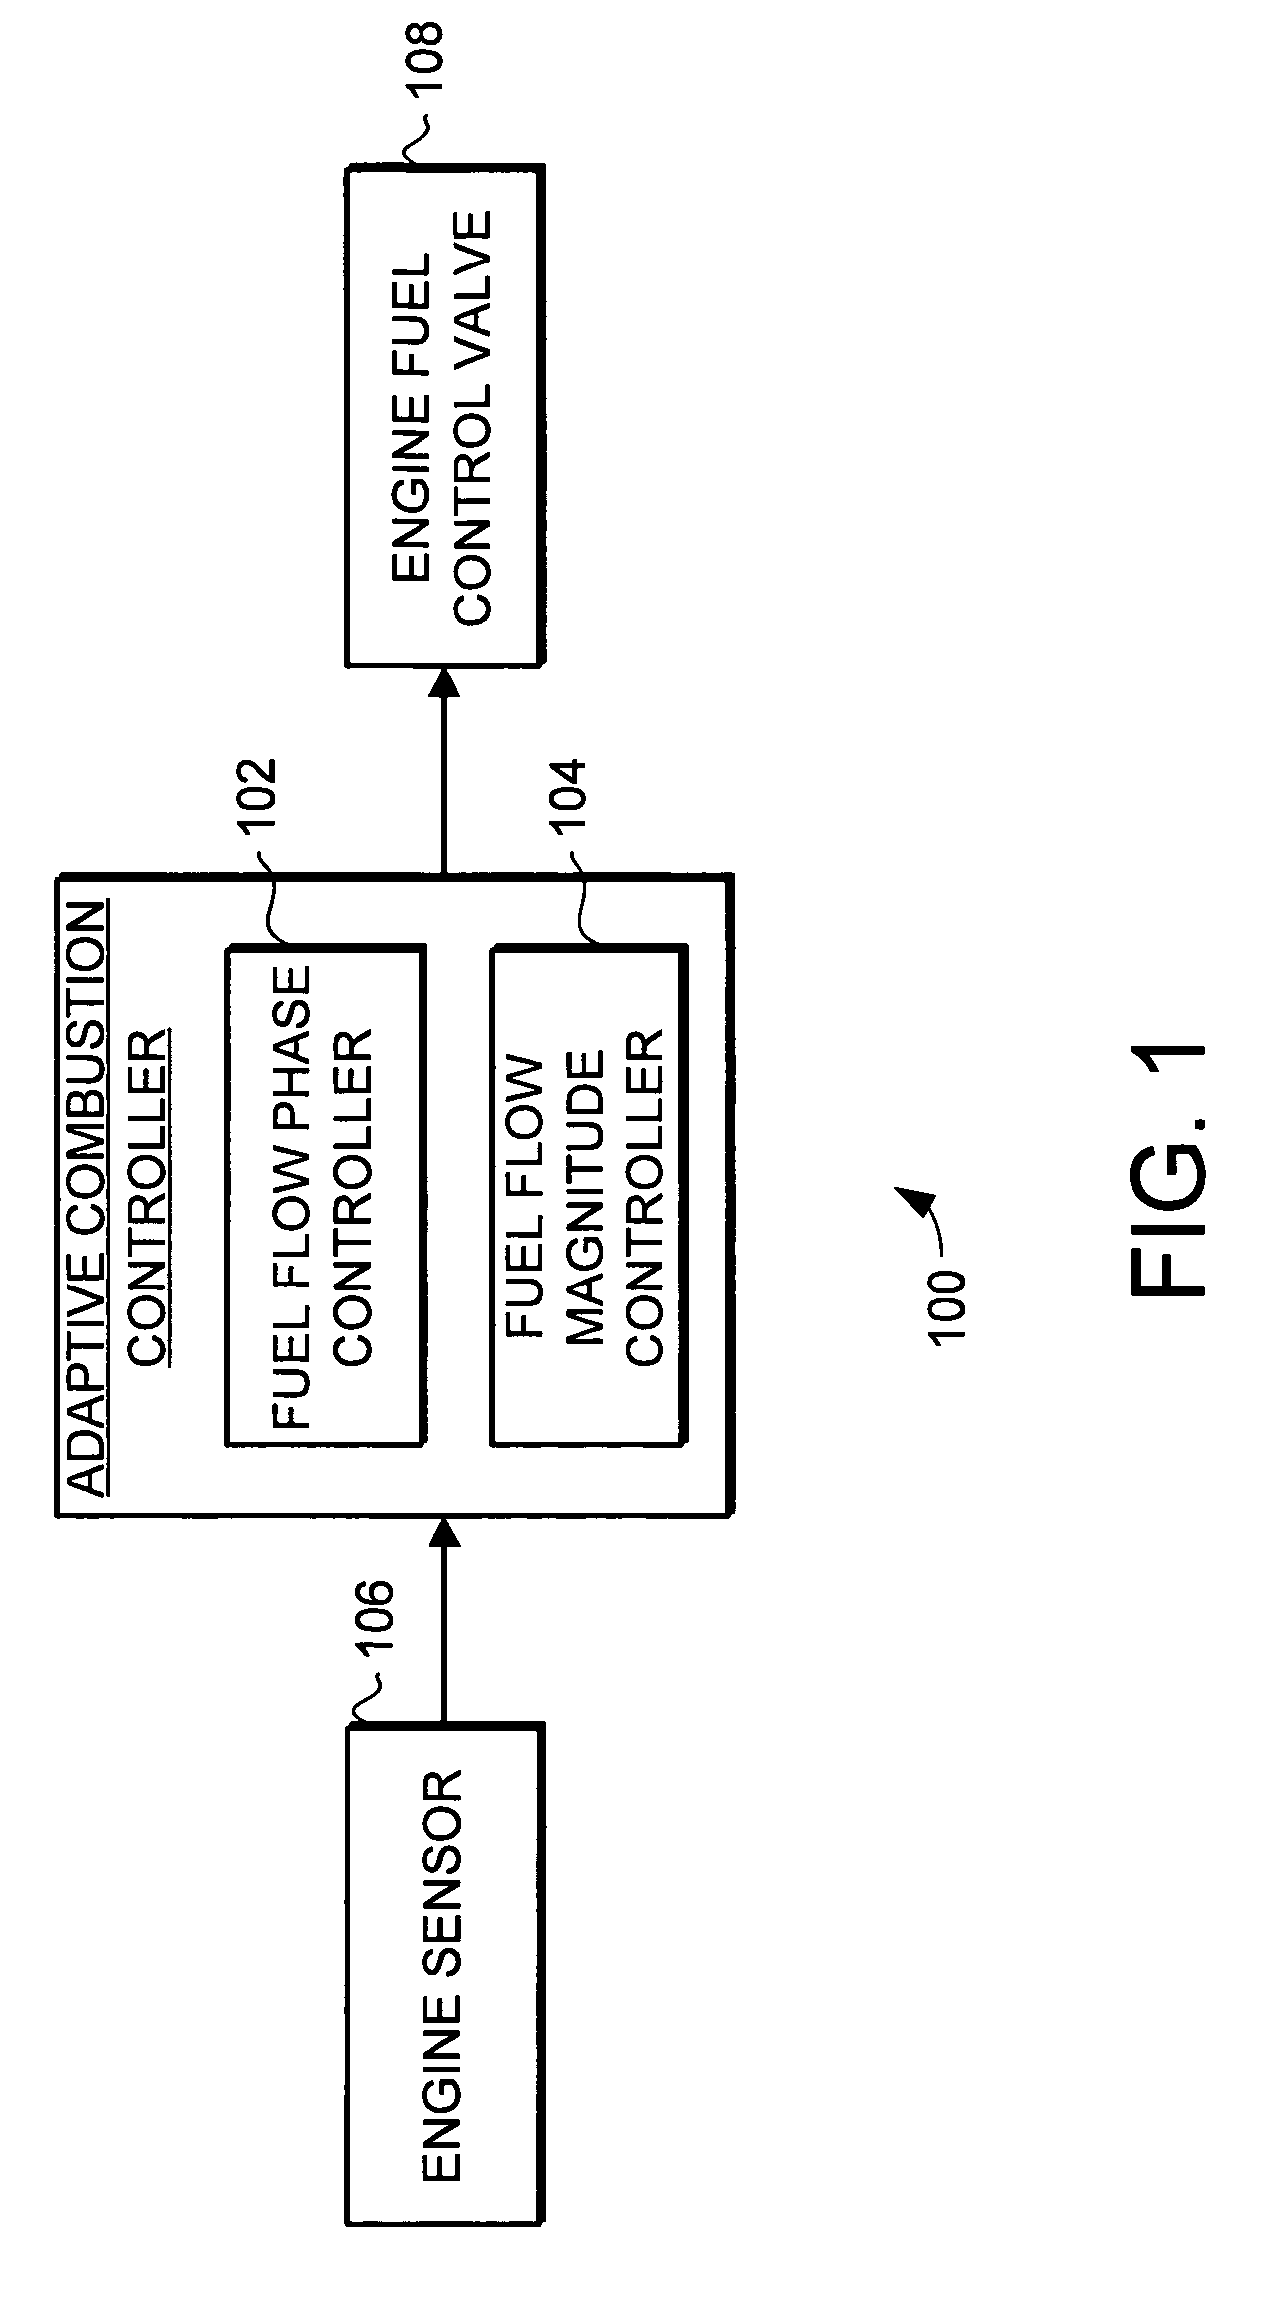 System and method for turbine engine adaptive control for mitigation of instabilities